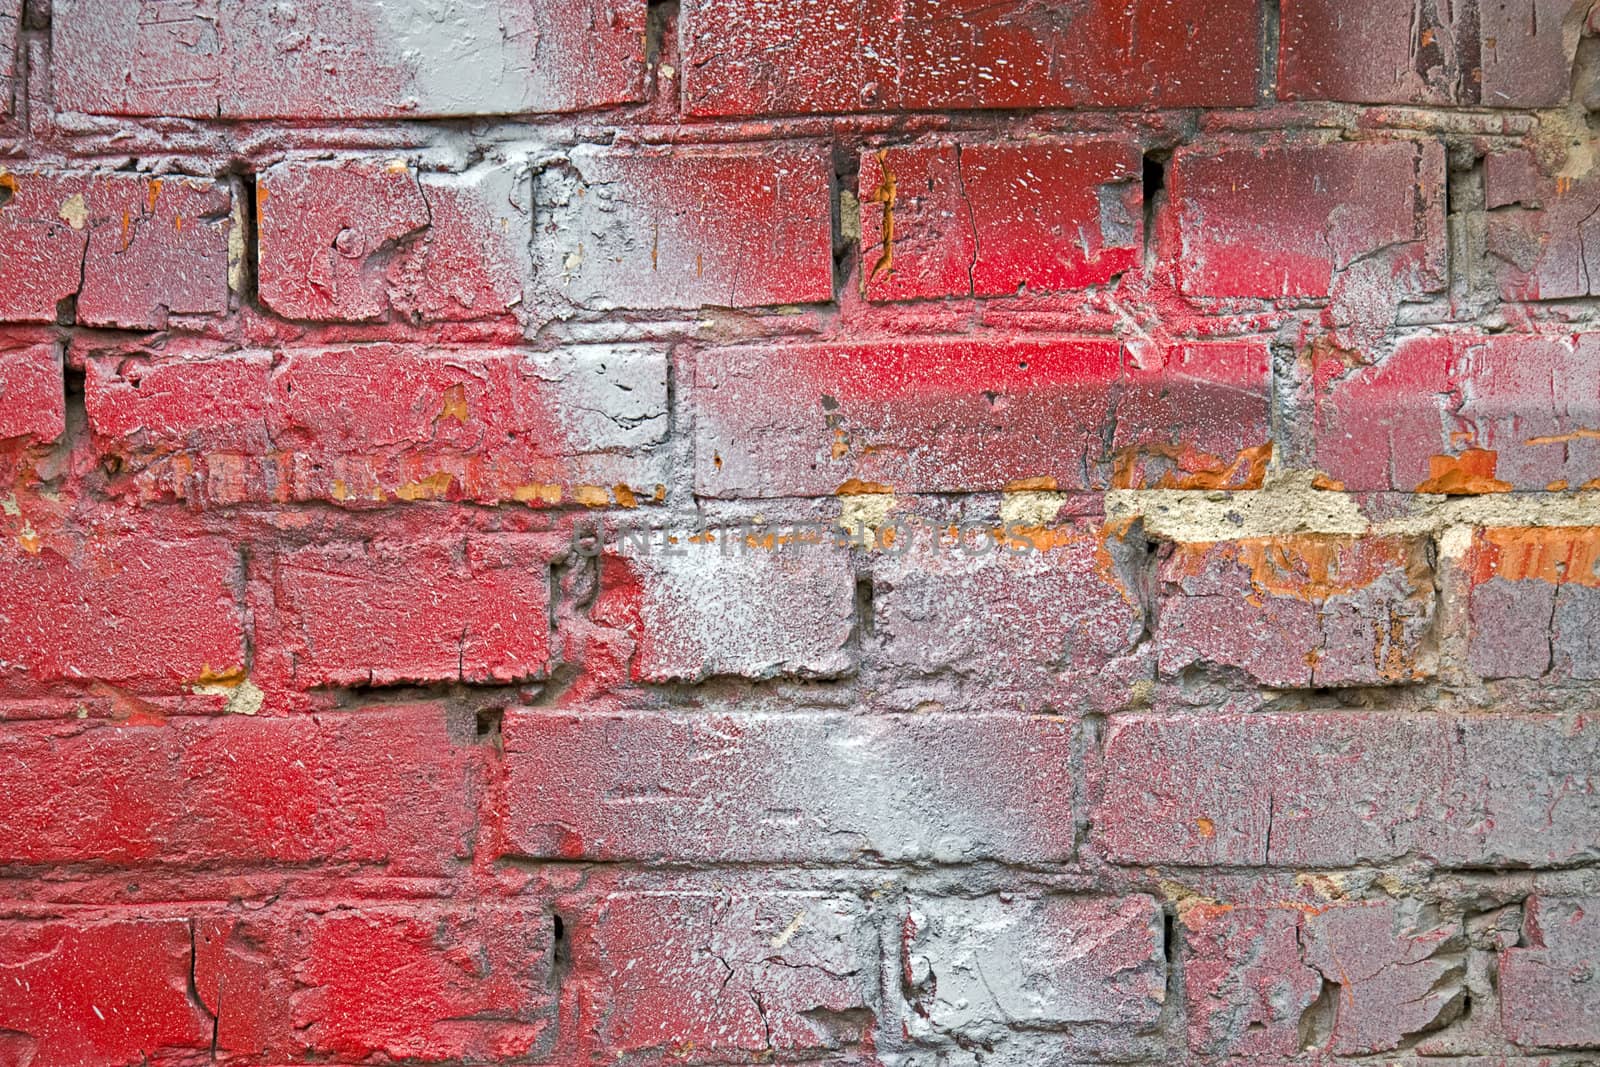 A fragment of the surface painted brick walls.